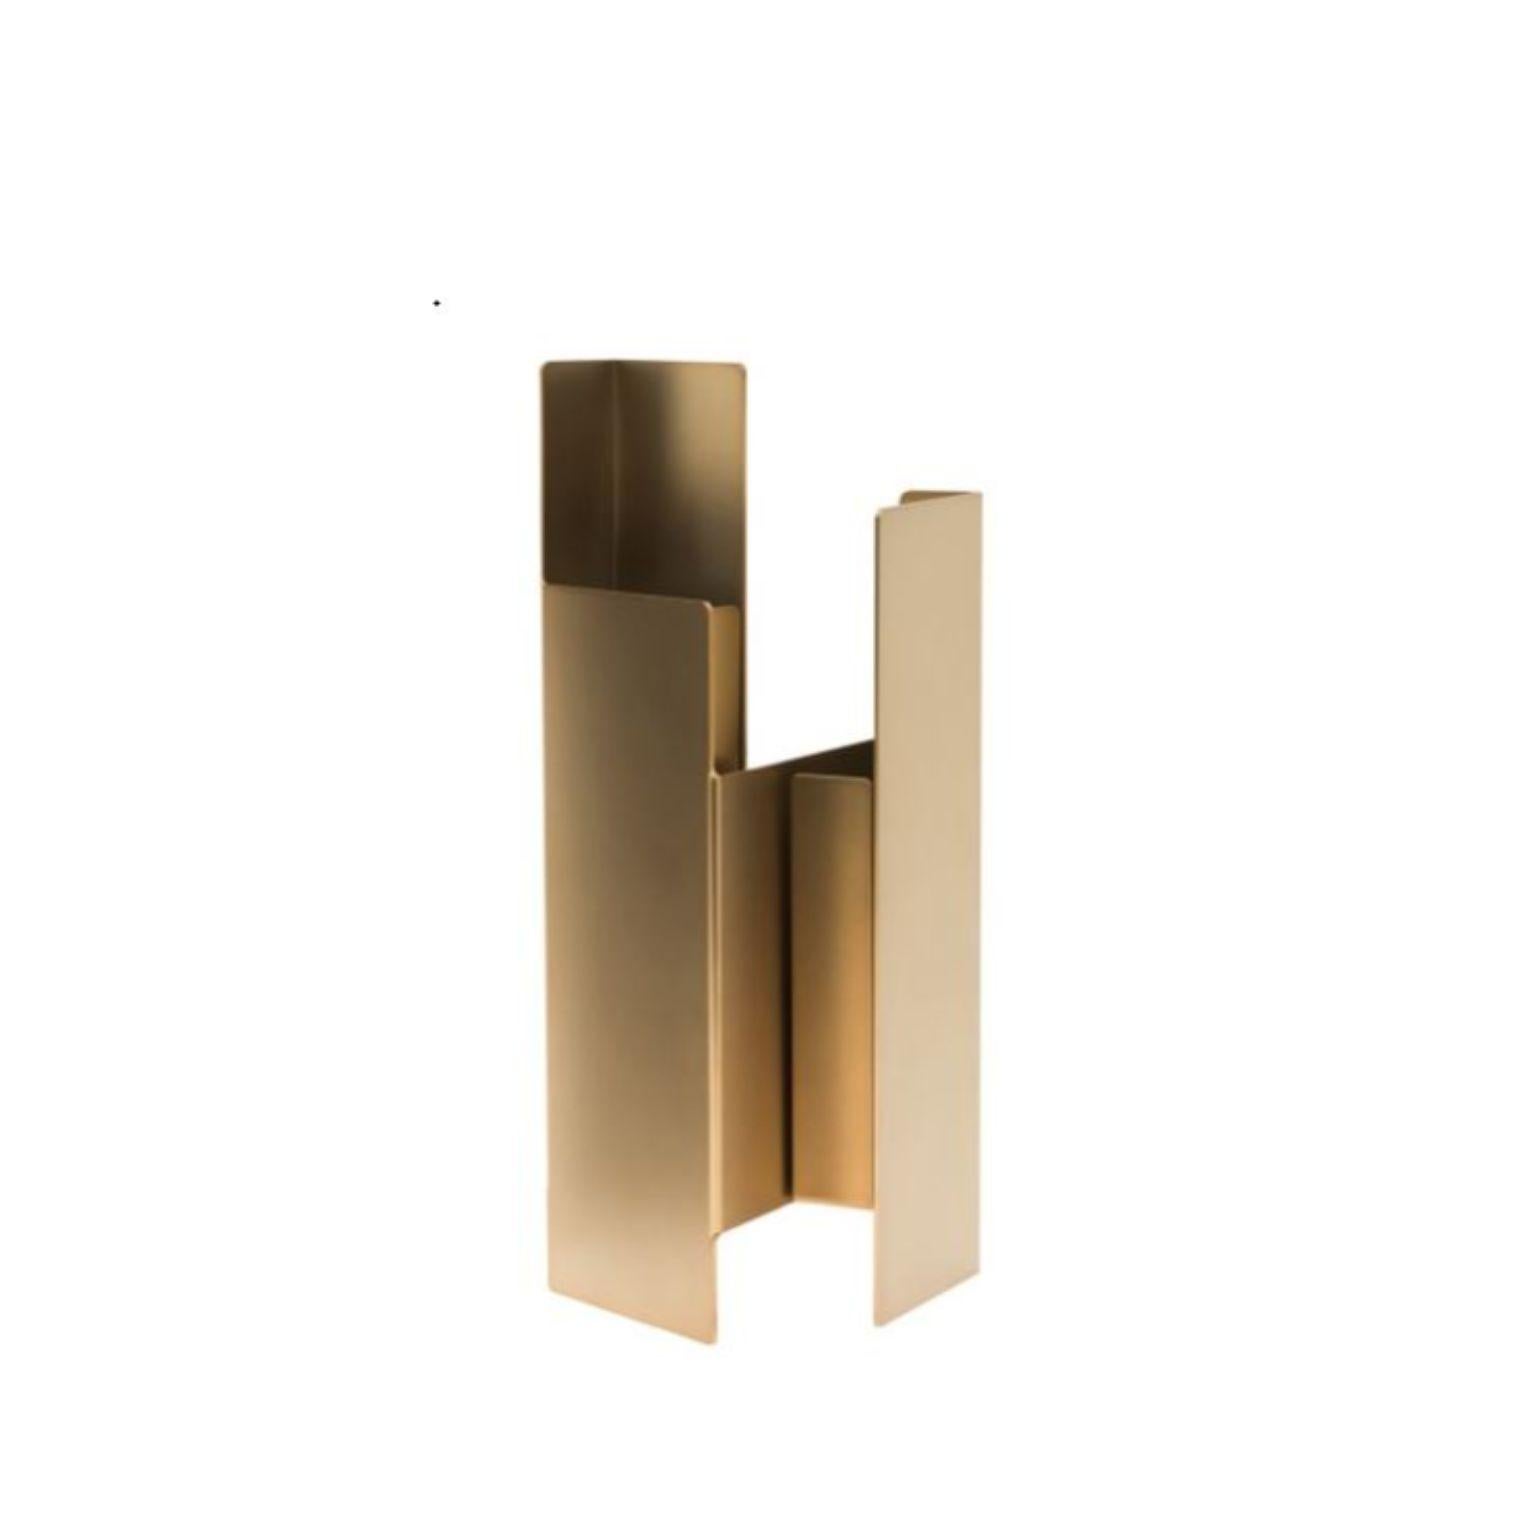 Matte bronze fugit vase by Mason Editions.
Design: Matteo Fiorini
Dimensions: 12 × 15 × 34 cm
Materials: Iron, Pirex glass.

Fugit vase consists of a metal sheet that seems to turn and close around itself, generating an alternation of fullness